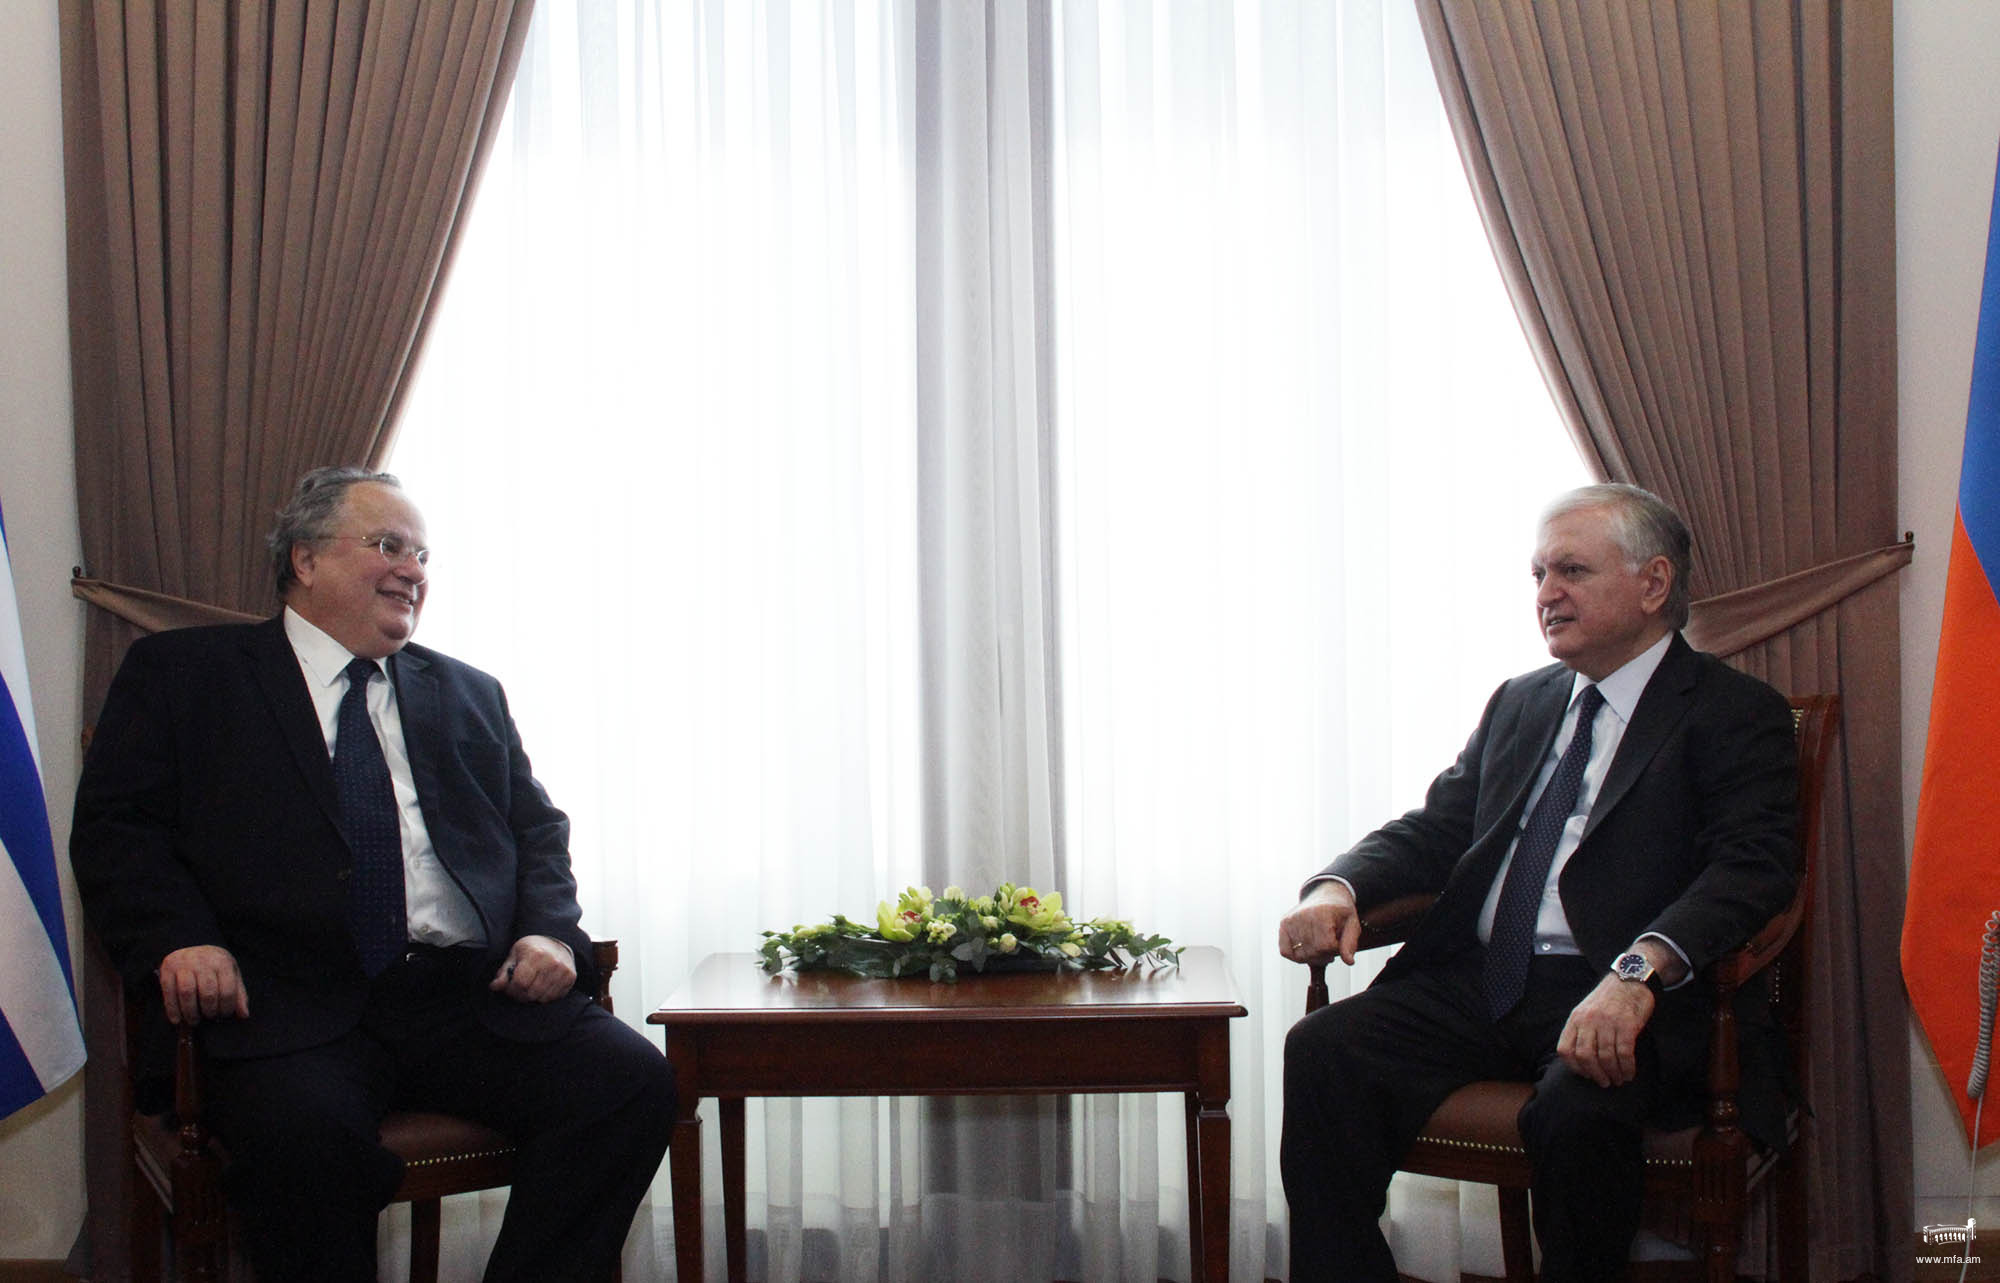 Meeting of Foreign Ministers of Armenia and Greece